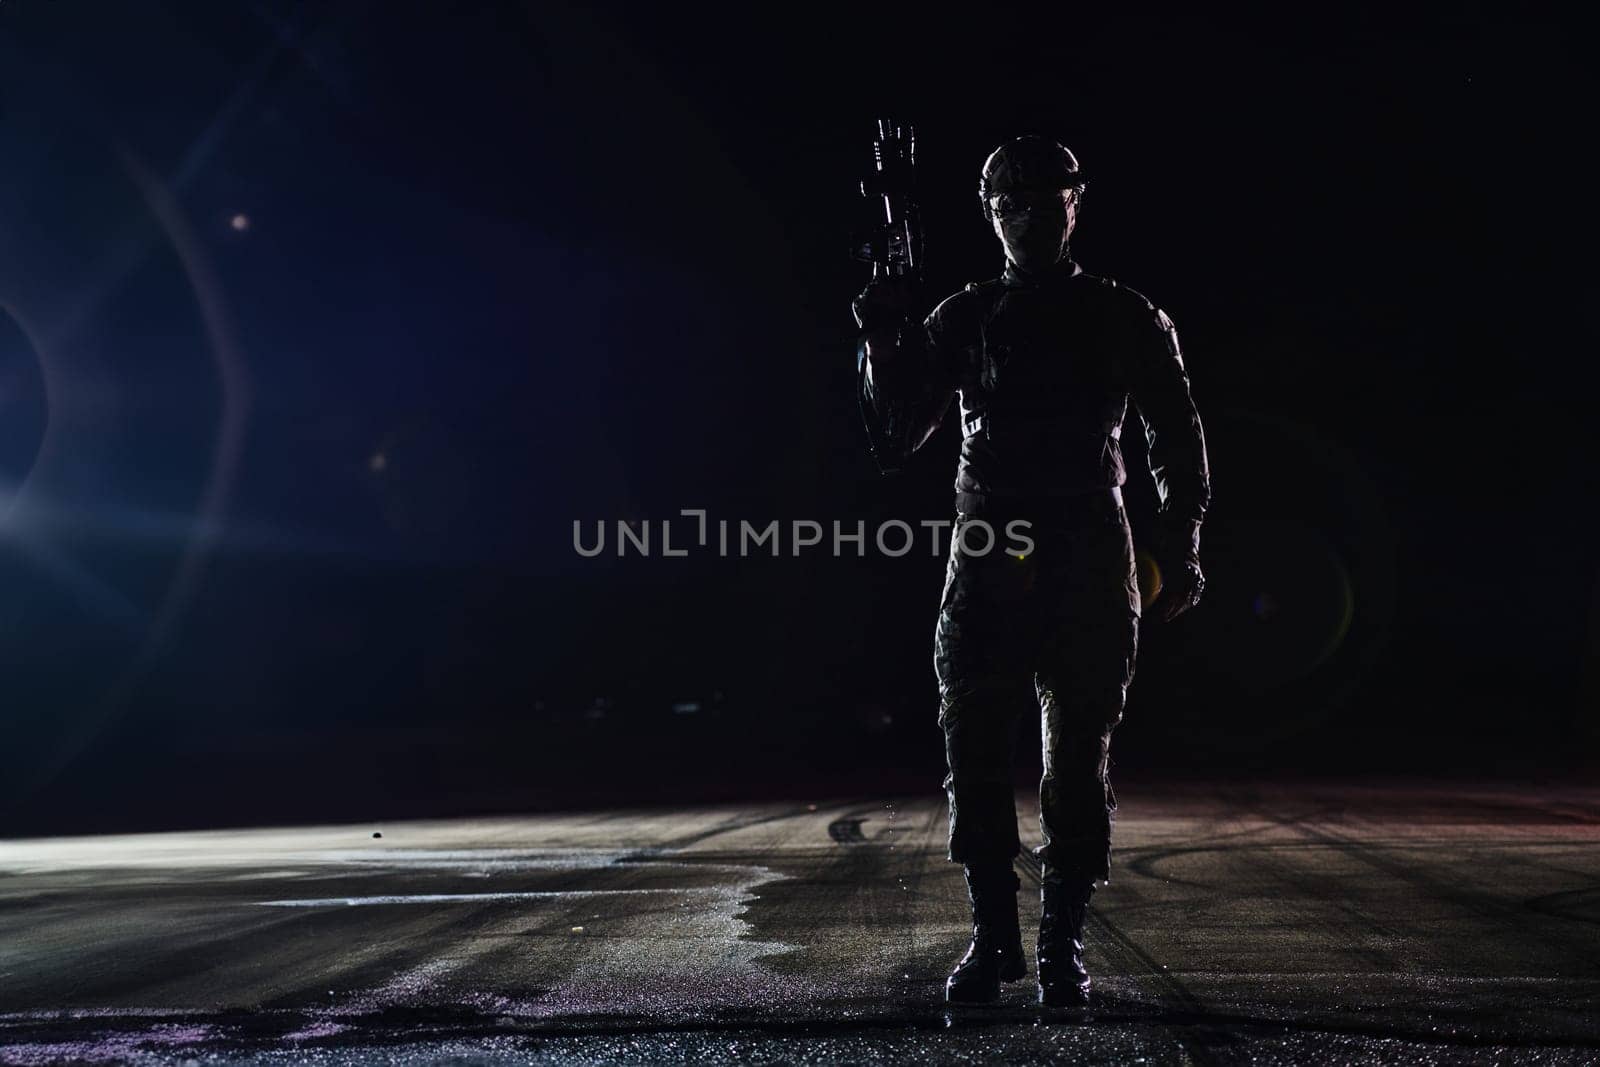 A professional soldier in full military gear striding through the dark night as he embarks on a perilous military mission.